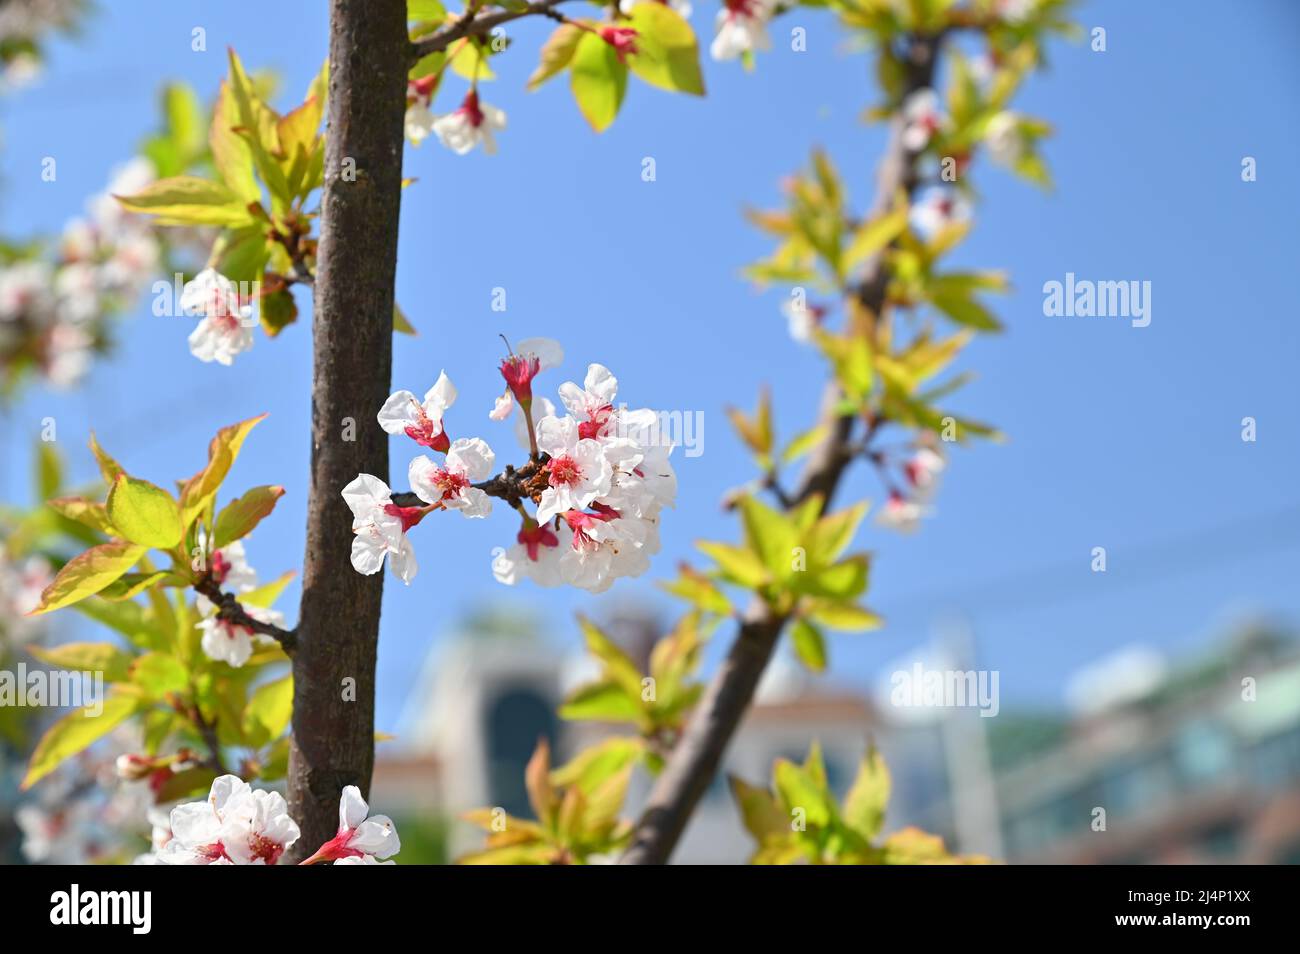 On a sunny day cherry blossoms are blooming beautifully Stock Photo